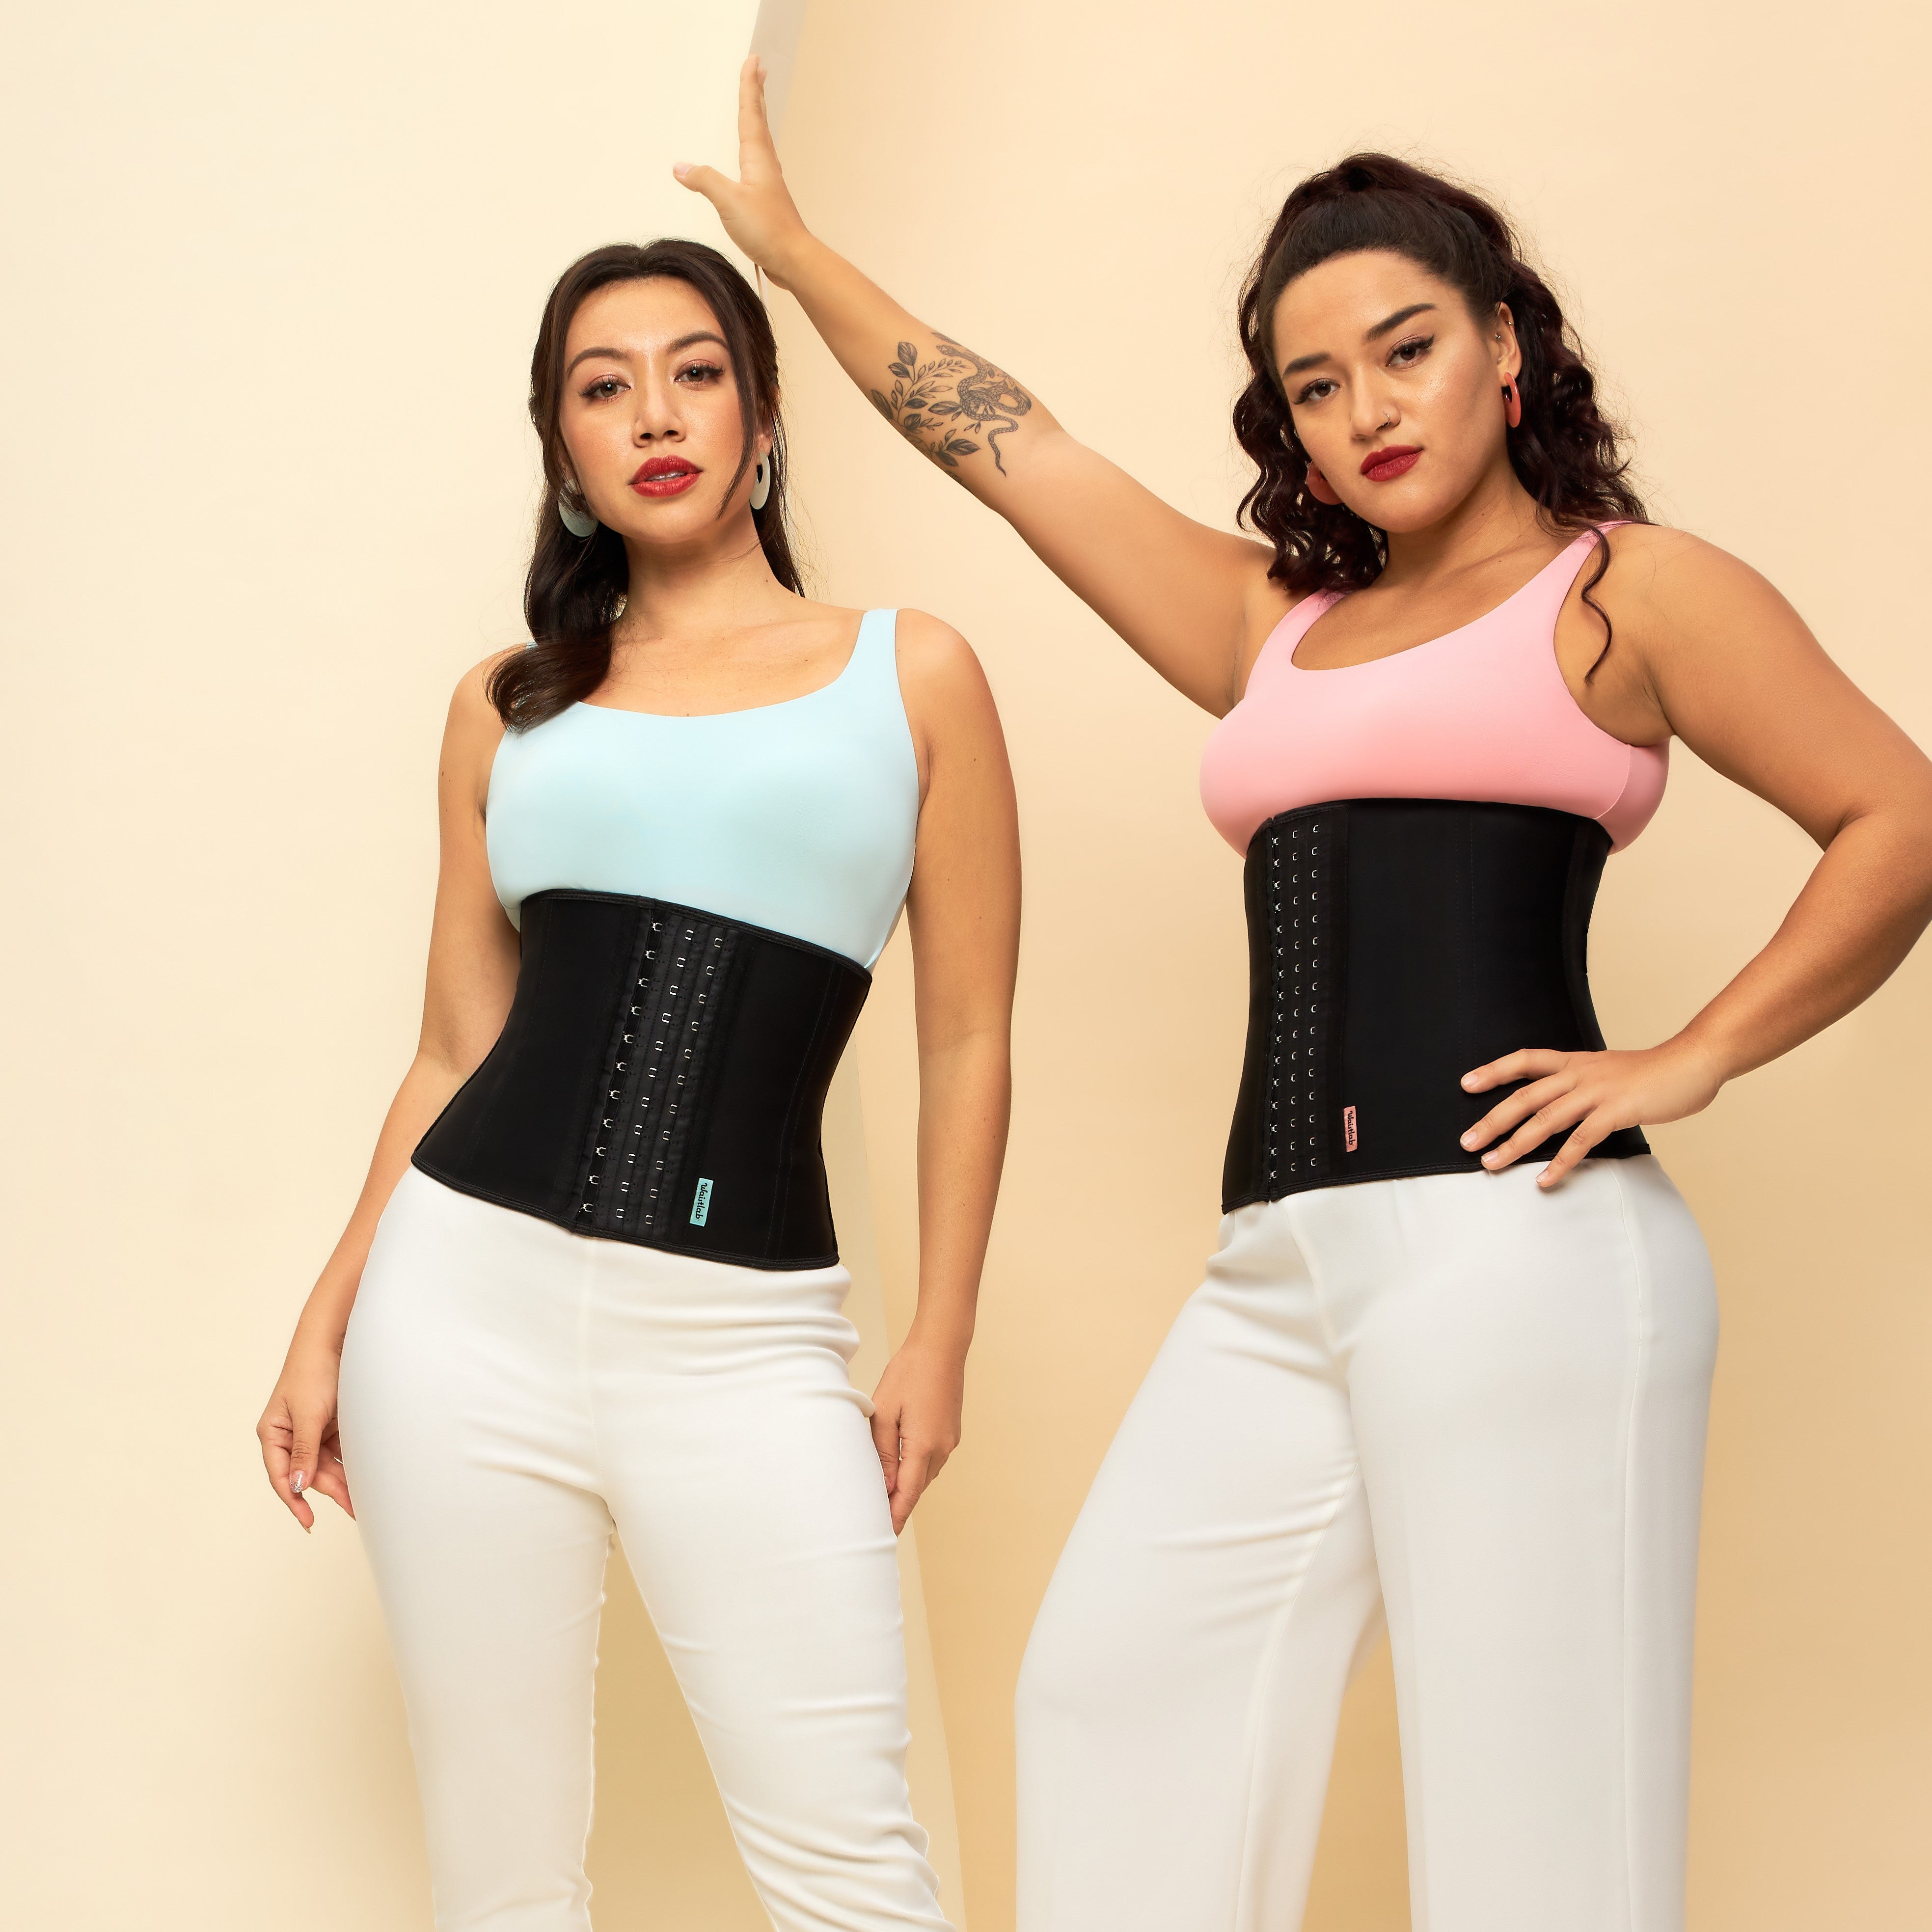 What's your first encounter with a waist trainer like?